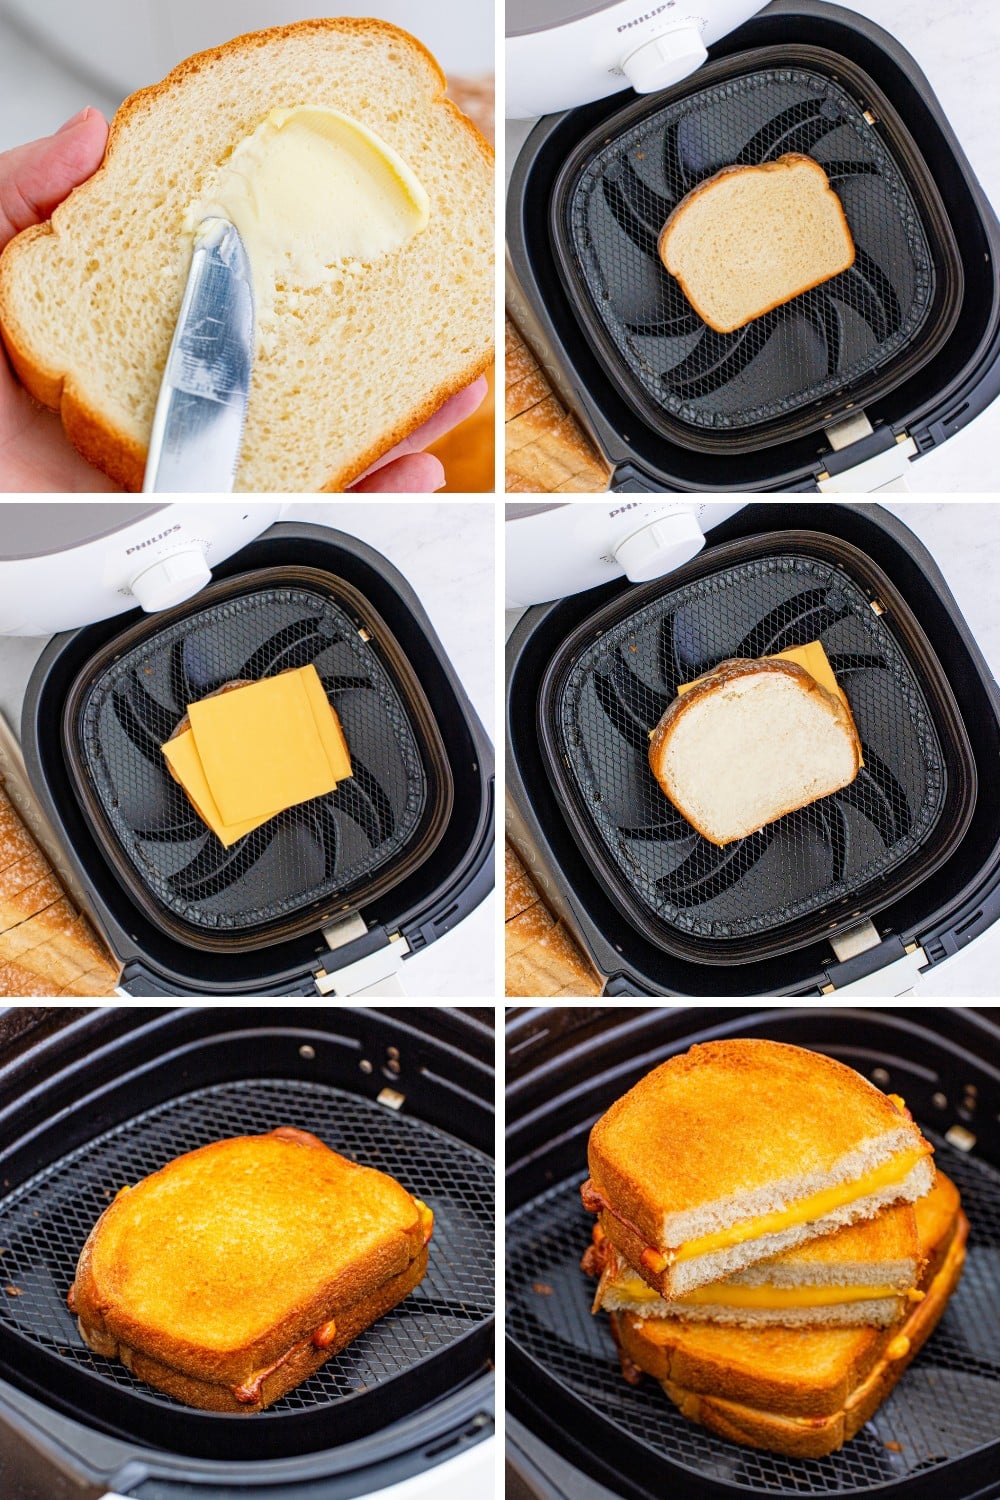 How to make grilled cheese sandwiches in the Air Fryer